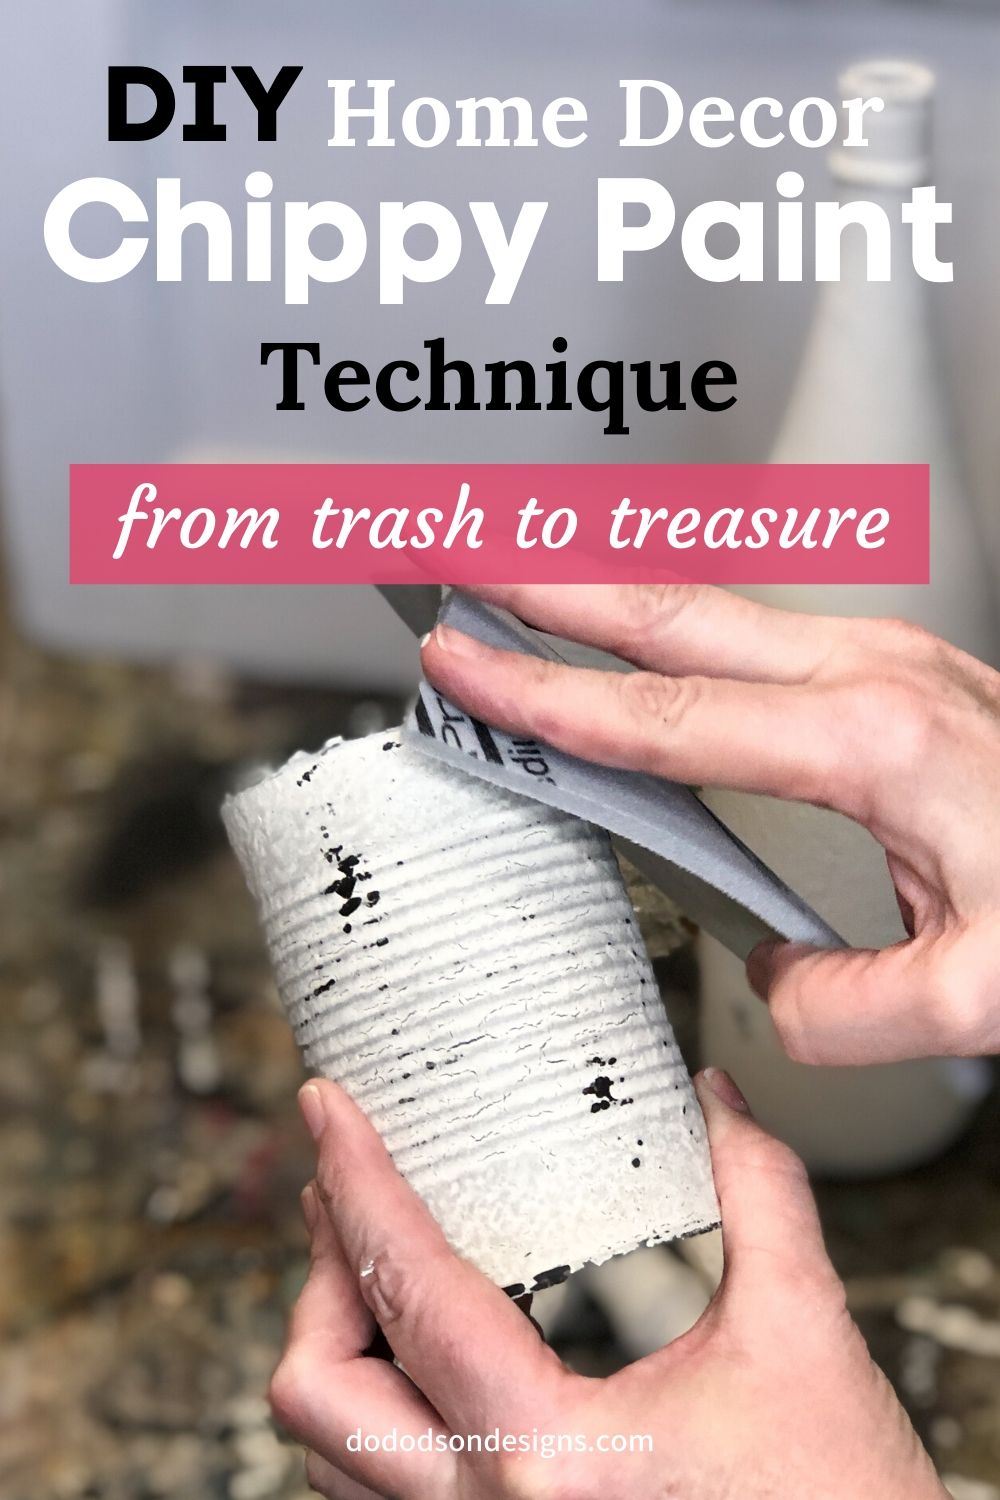 Chippy Paint Technique: From Trash To Treasure